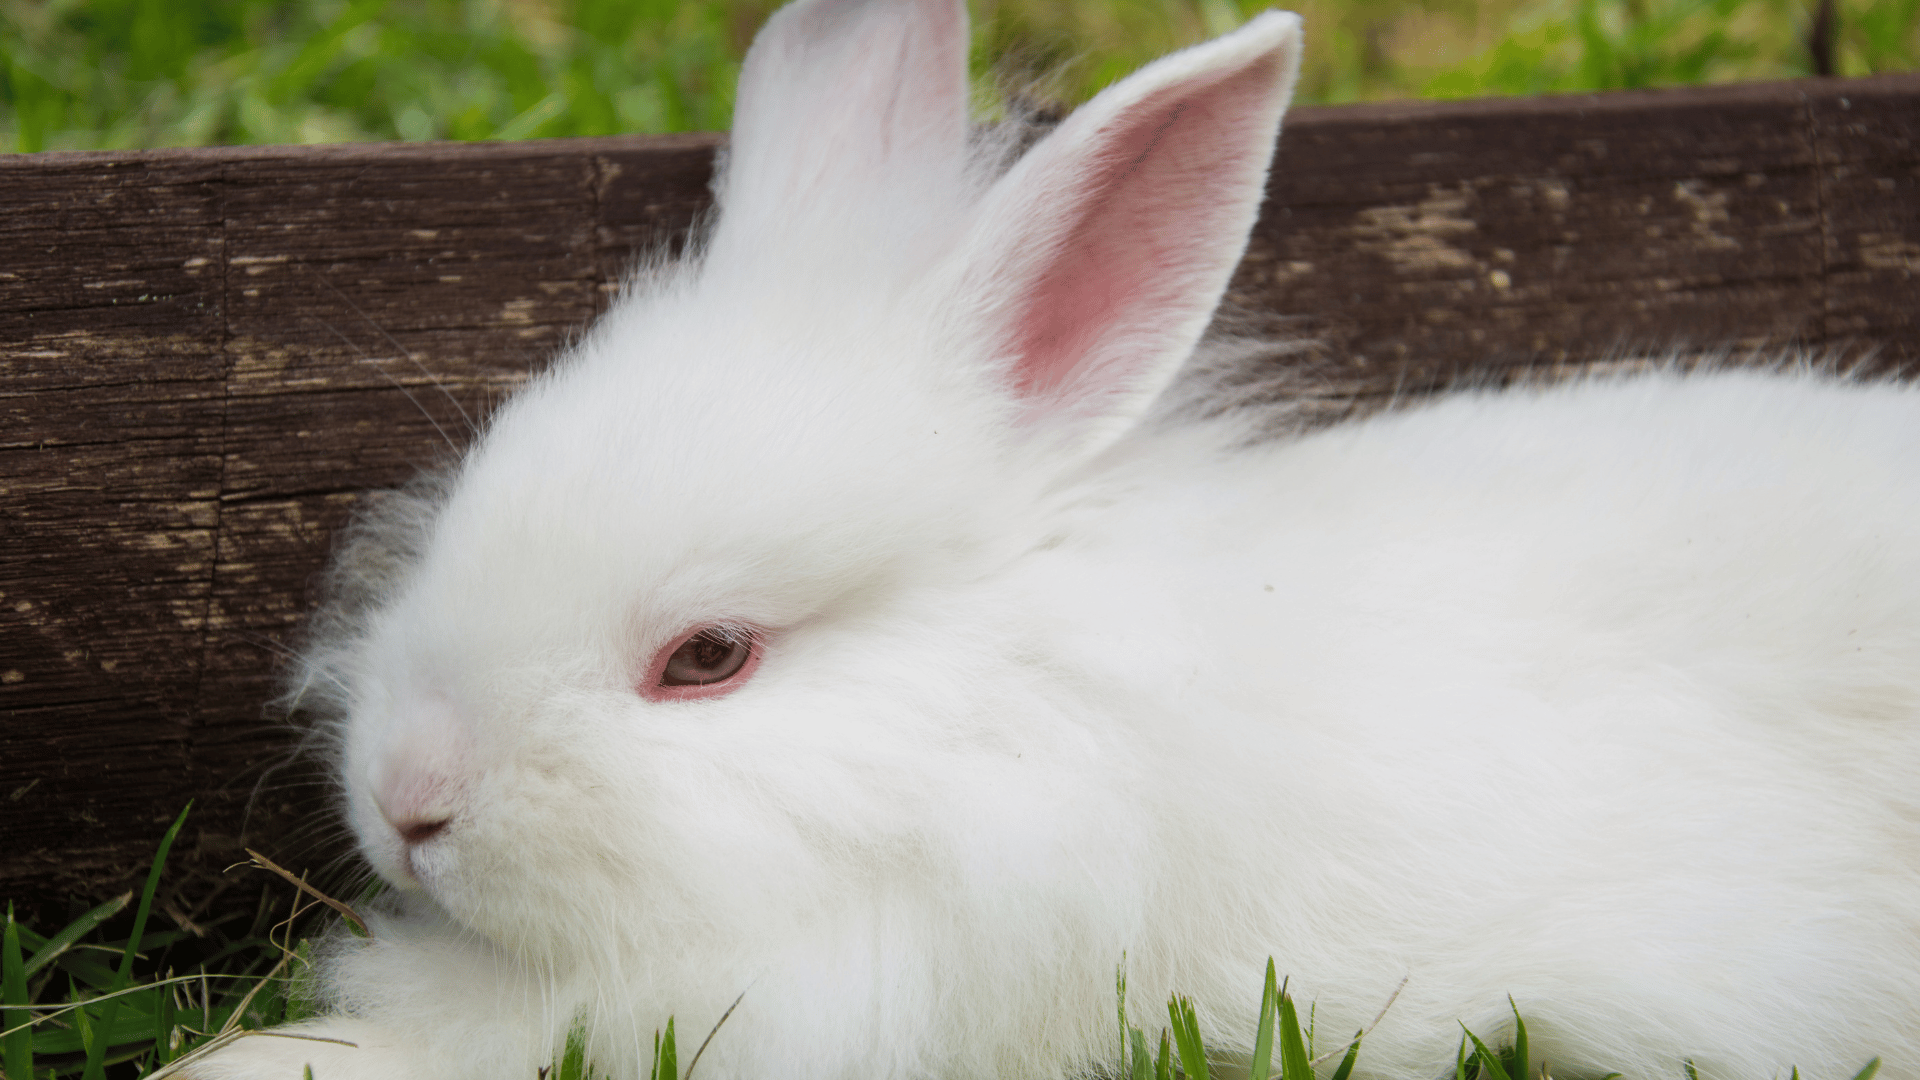 image of fluffy white rabbit with red eyes